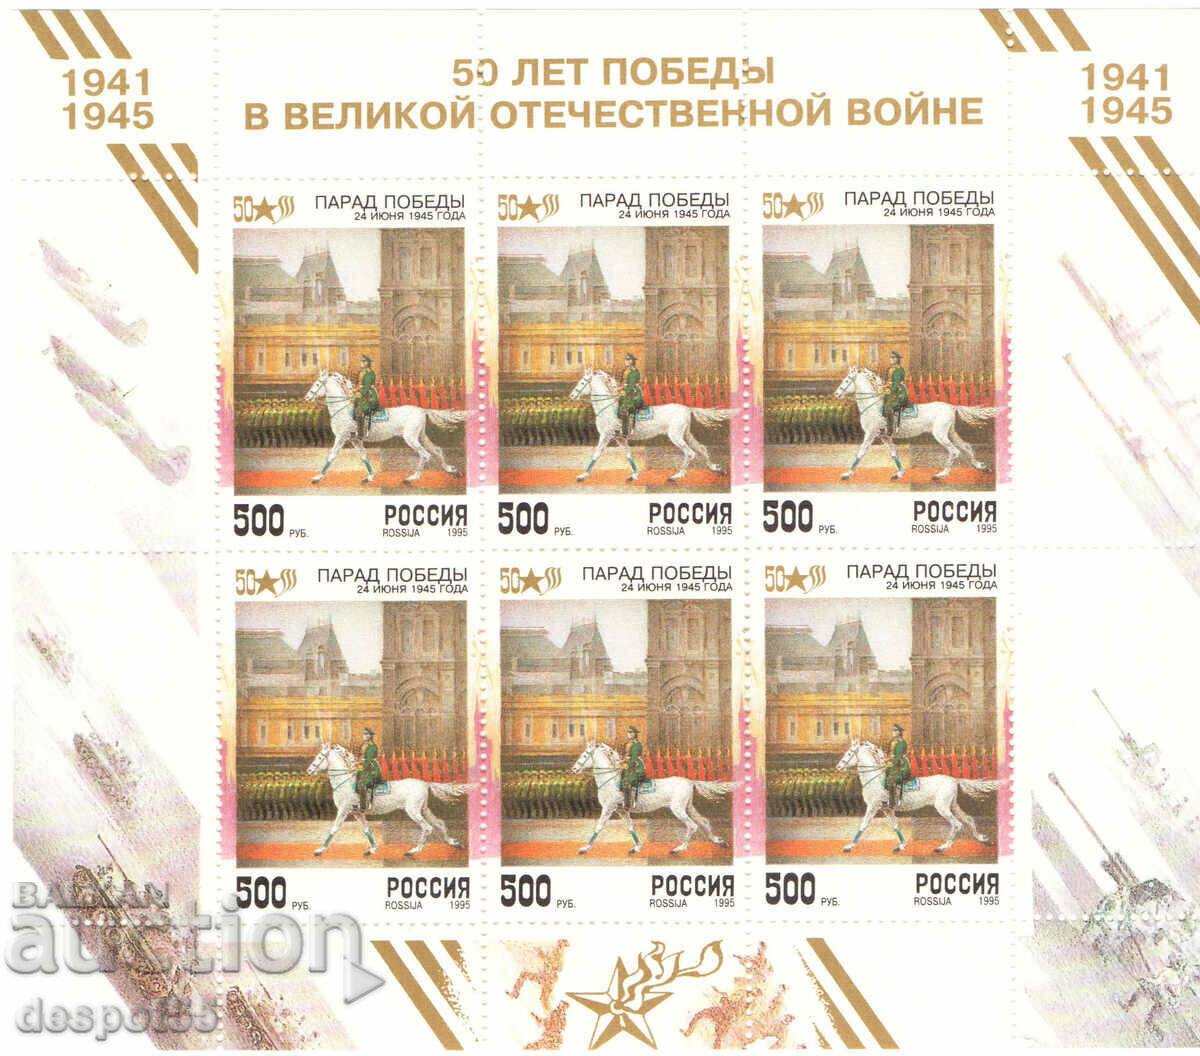 1995. Russia. The 50th anniversary of the victory. Block.